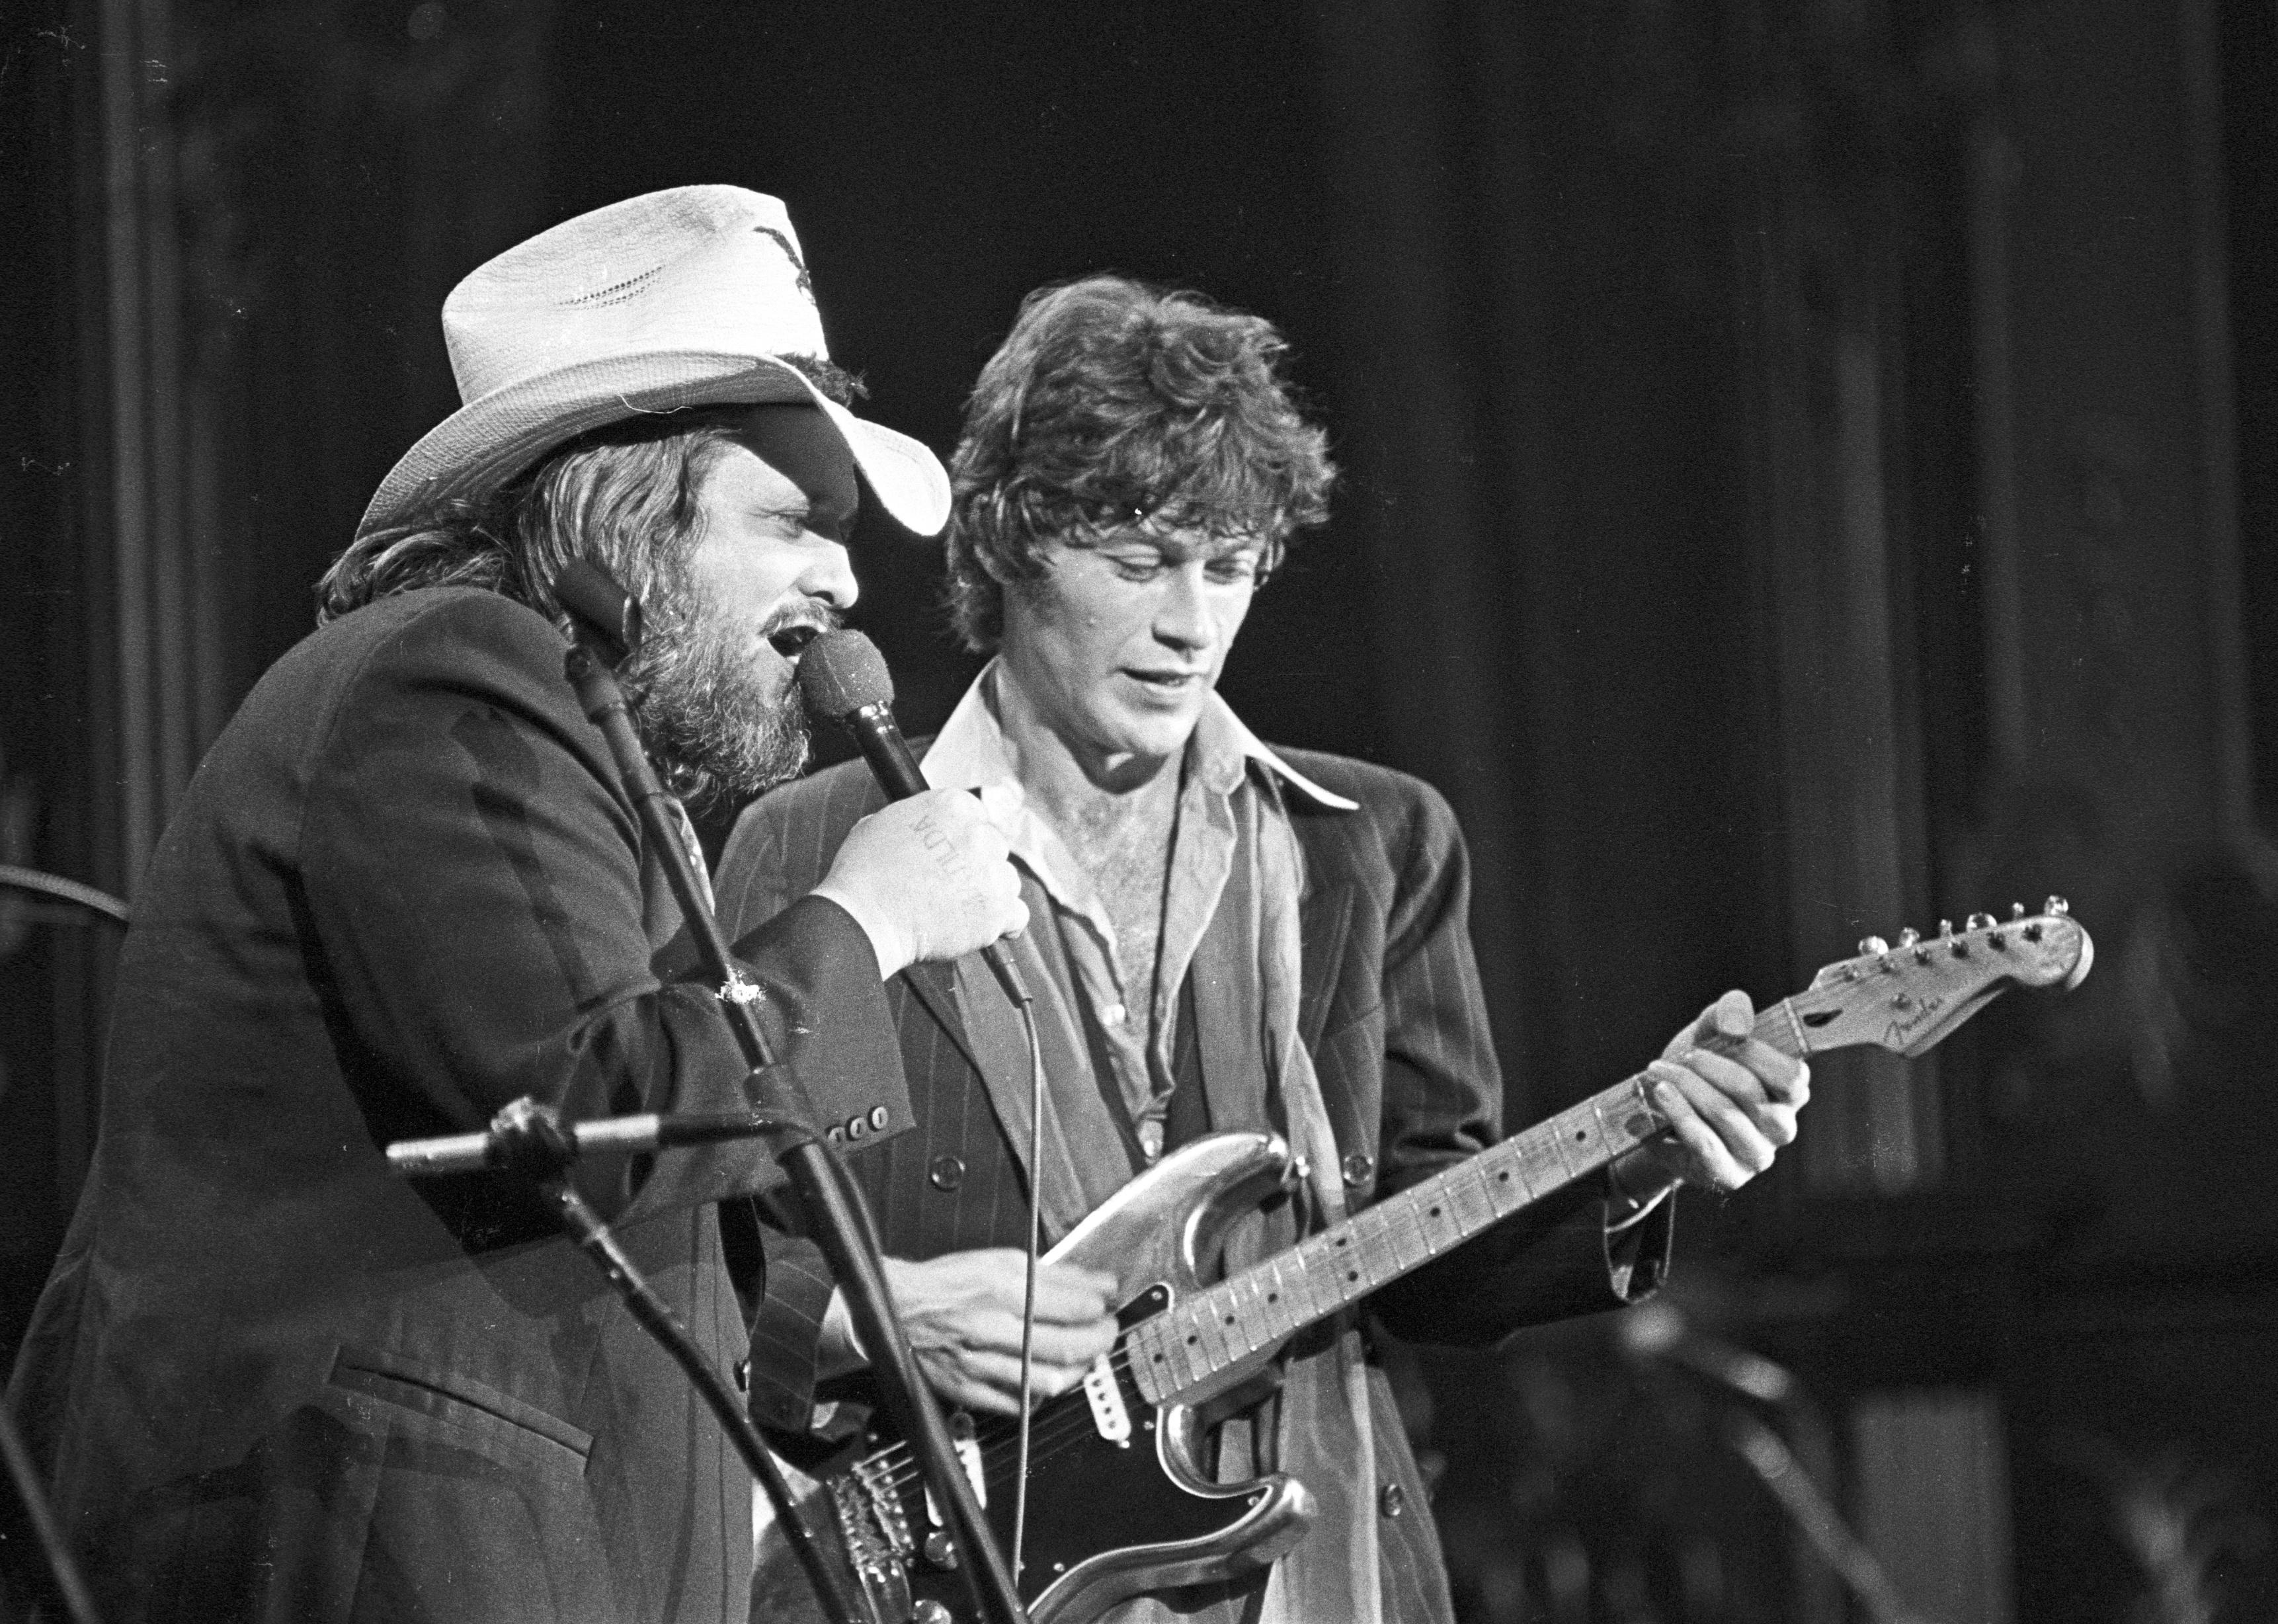 Musicians Ronnie Hawkins and Robbie Robertson perform on stage at The Band's 'The Last Waltz' concert.